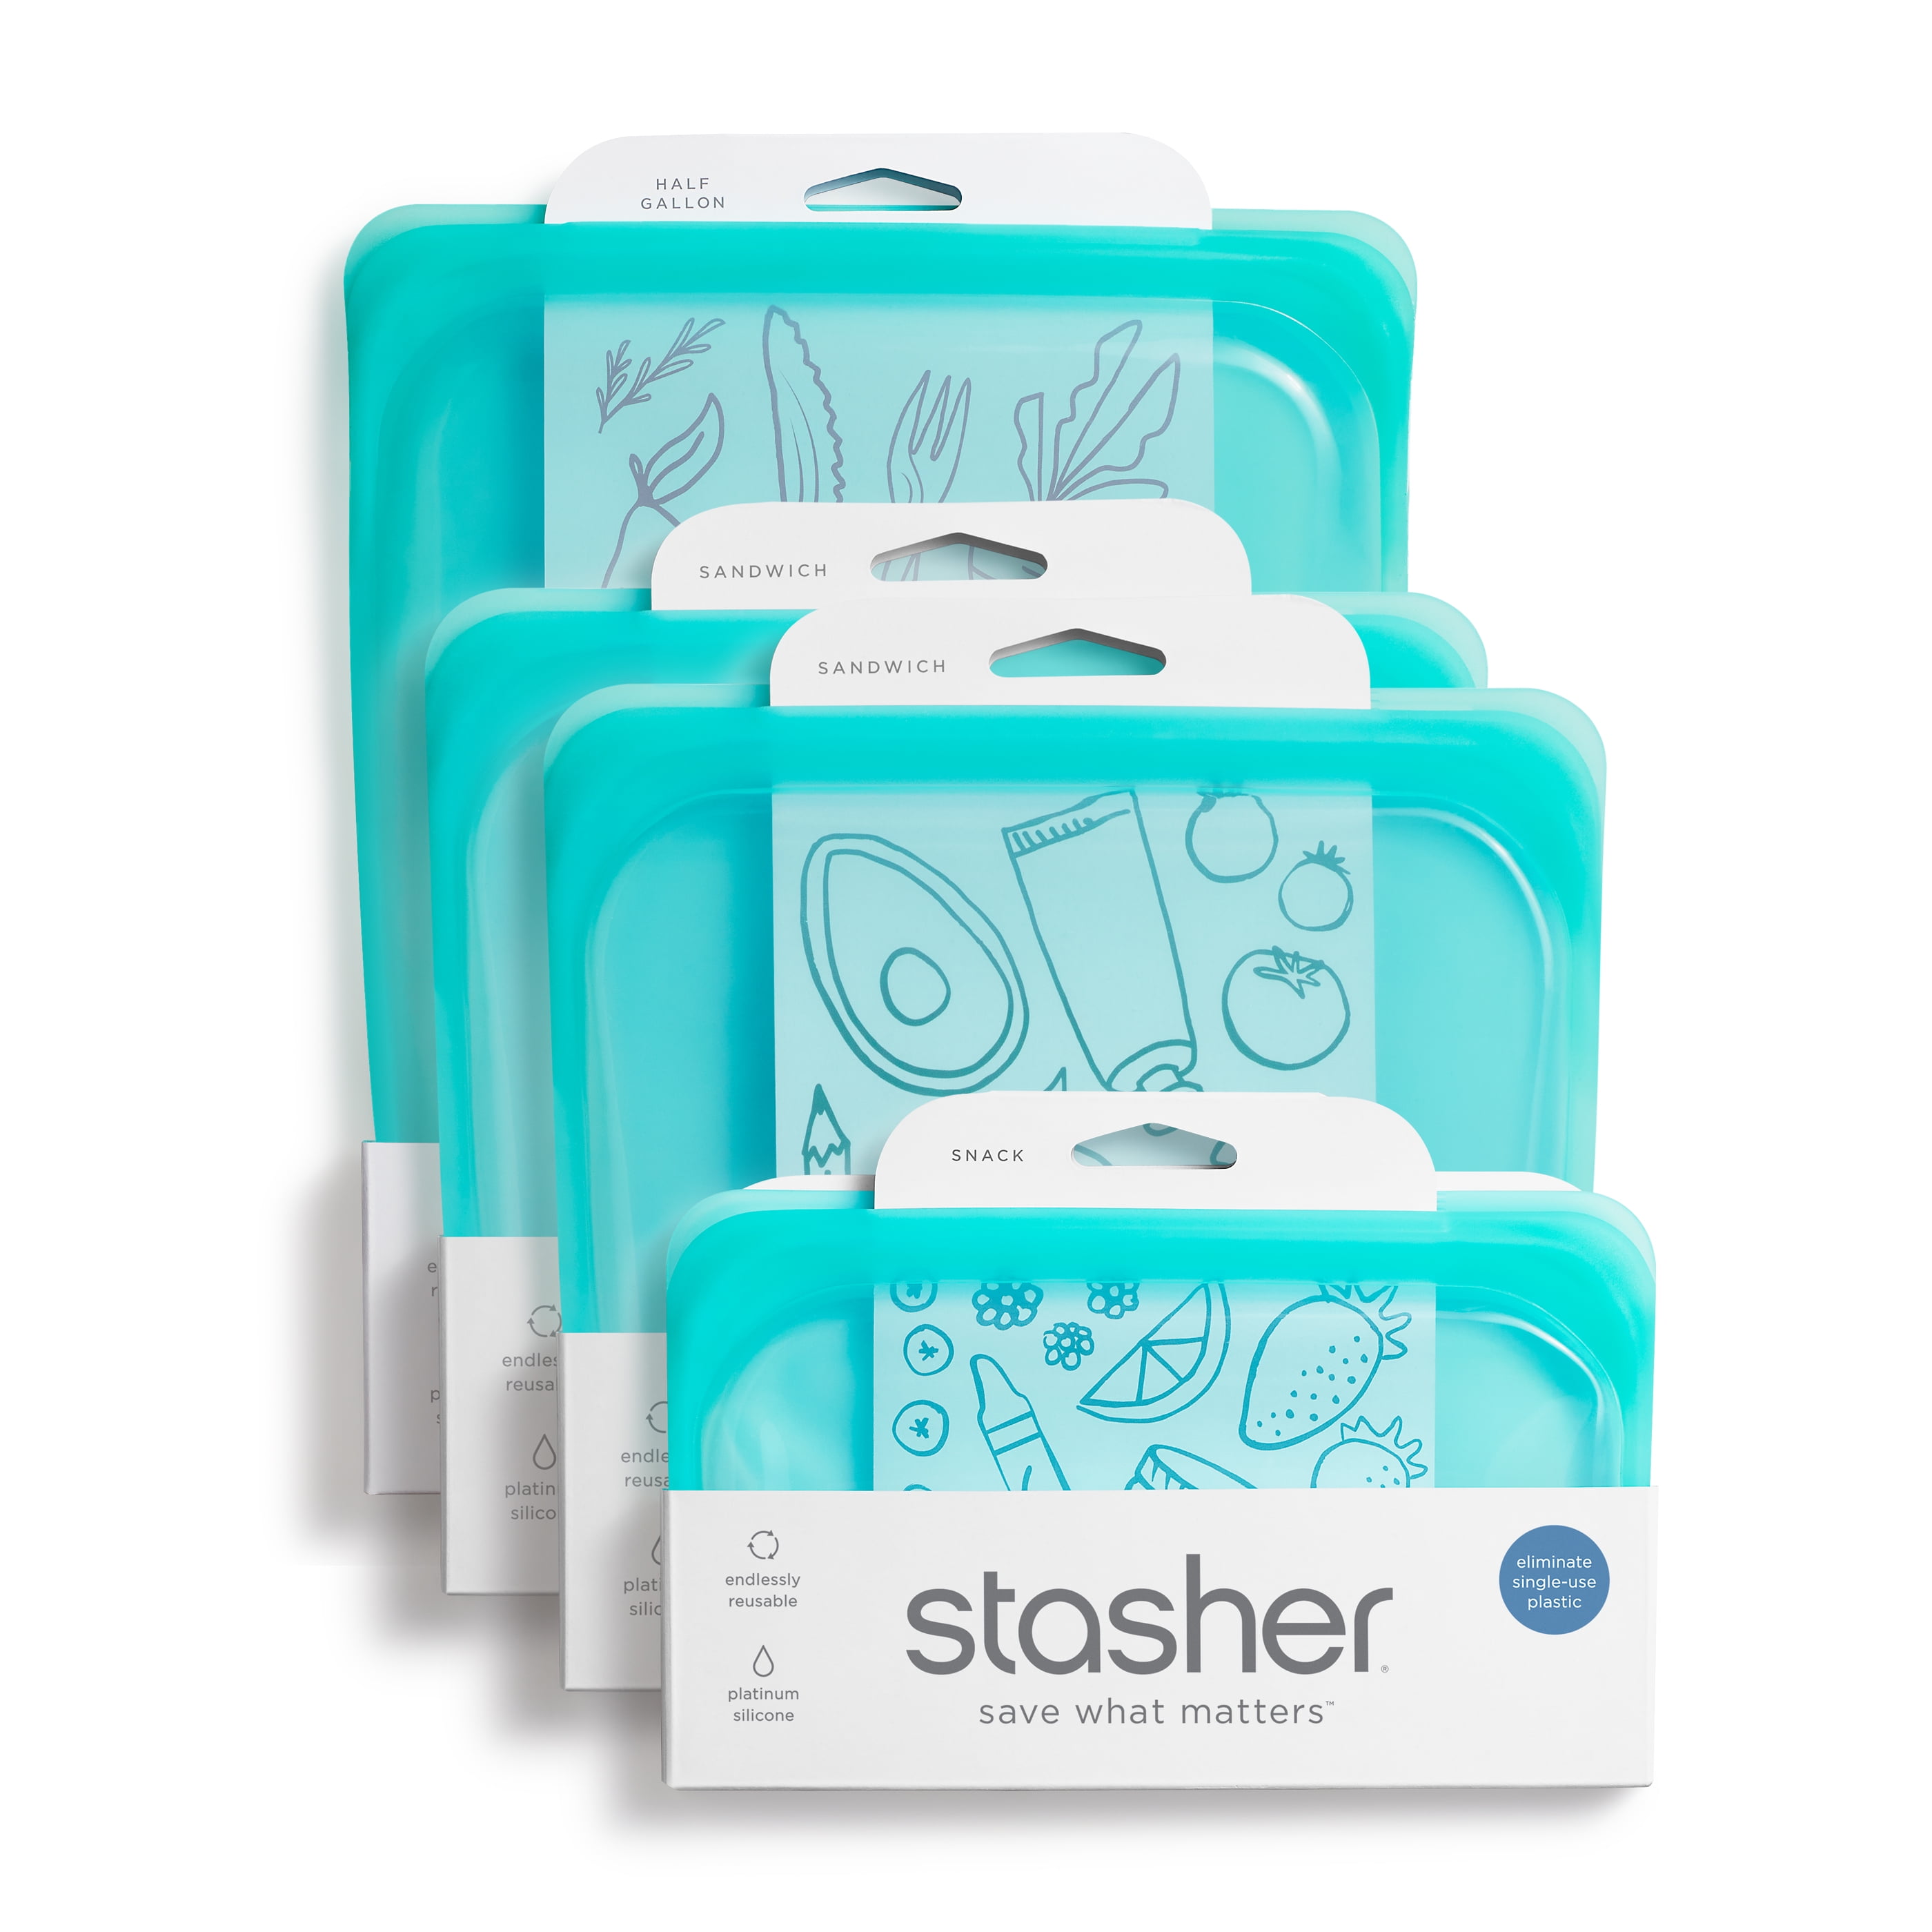 Kitchen HQ 4-Pack Reusable Silicone Bags Open Box